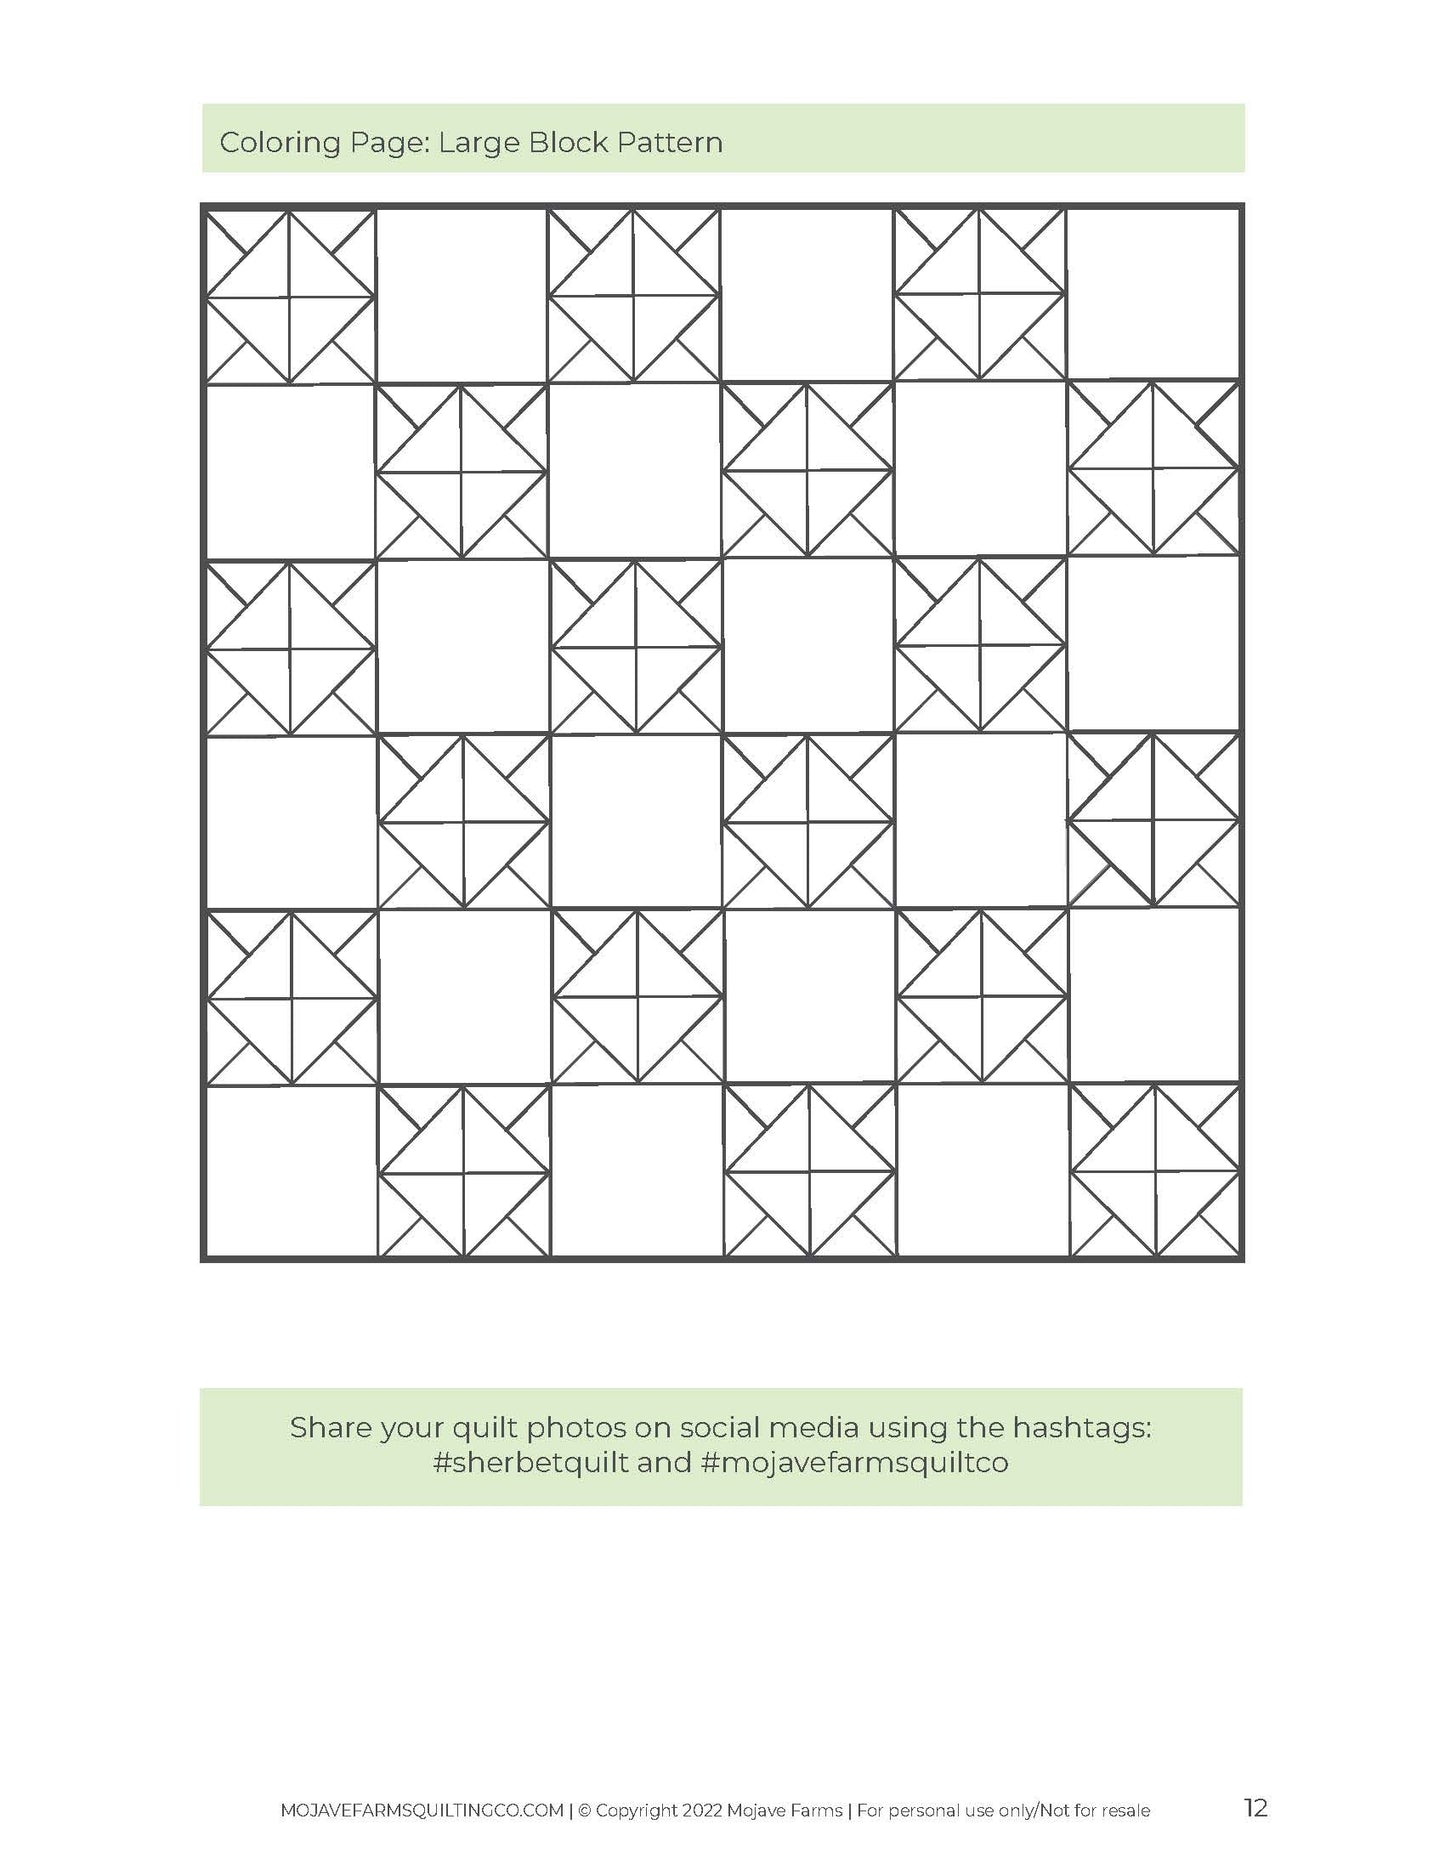 Sherbet Quilt Coloring Page (Large Block)